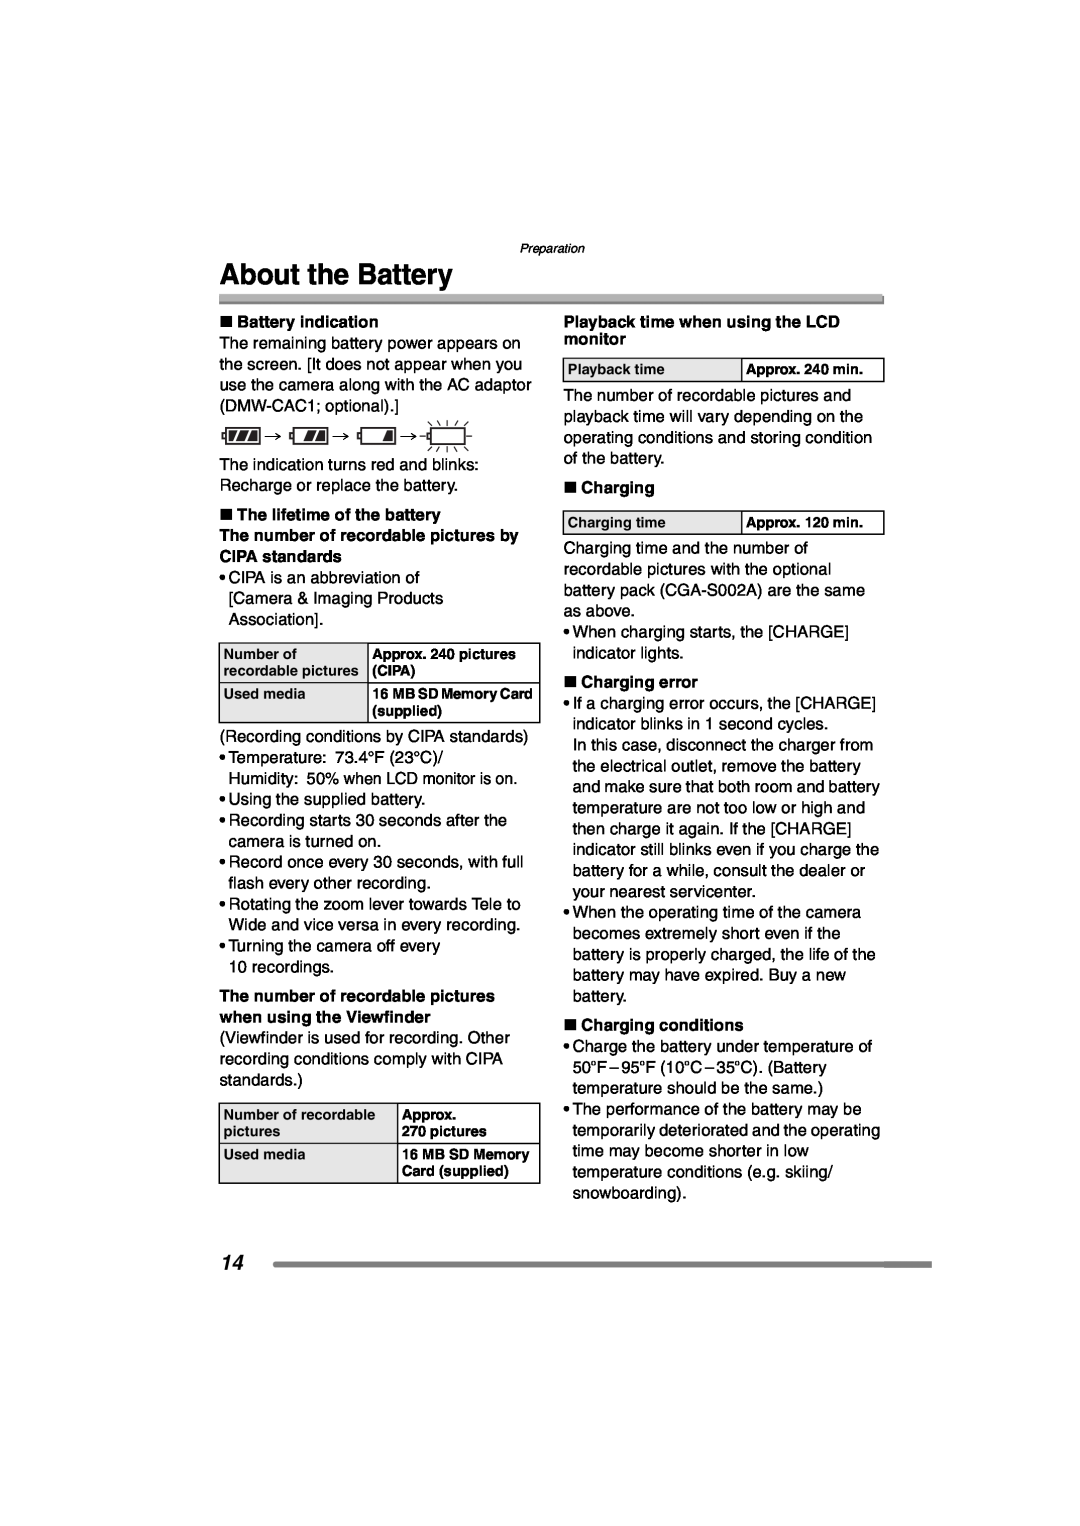 Panasonic DMC-FZ20PP About the Battery, Battery indication, ∫ The lifetime of the battery, ∫ Charging error 